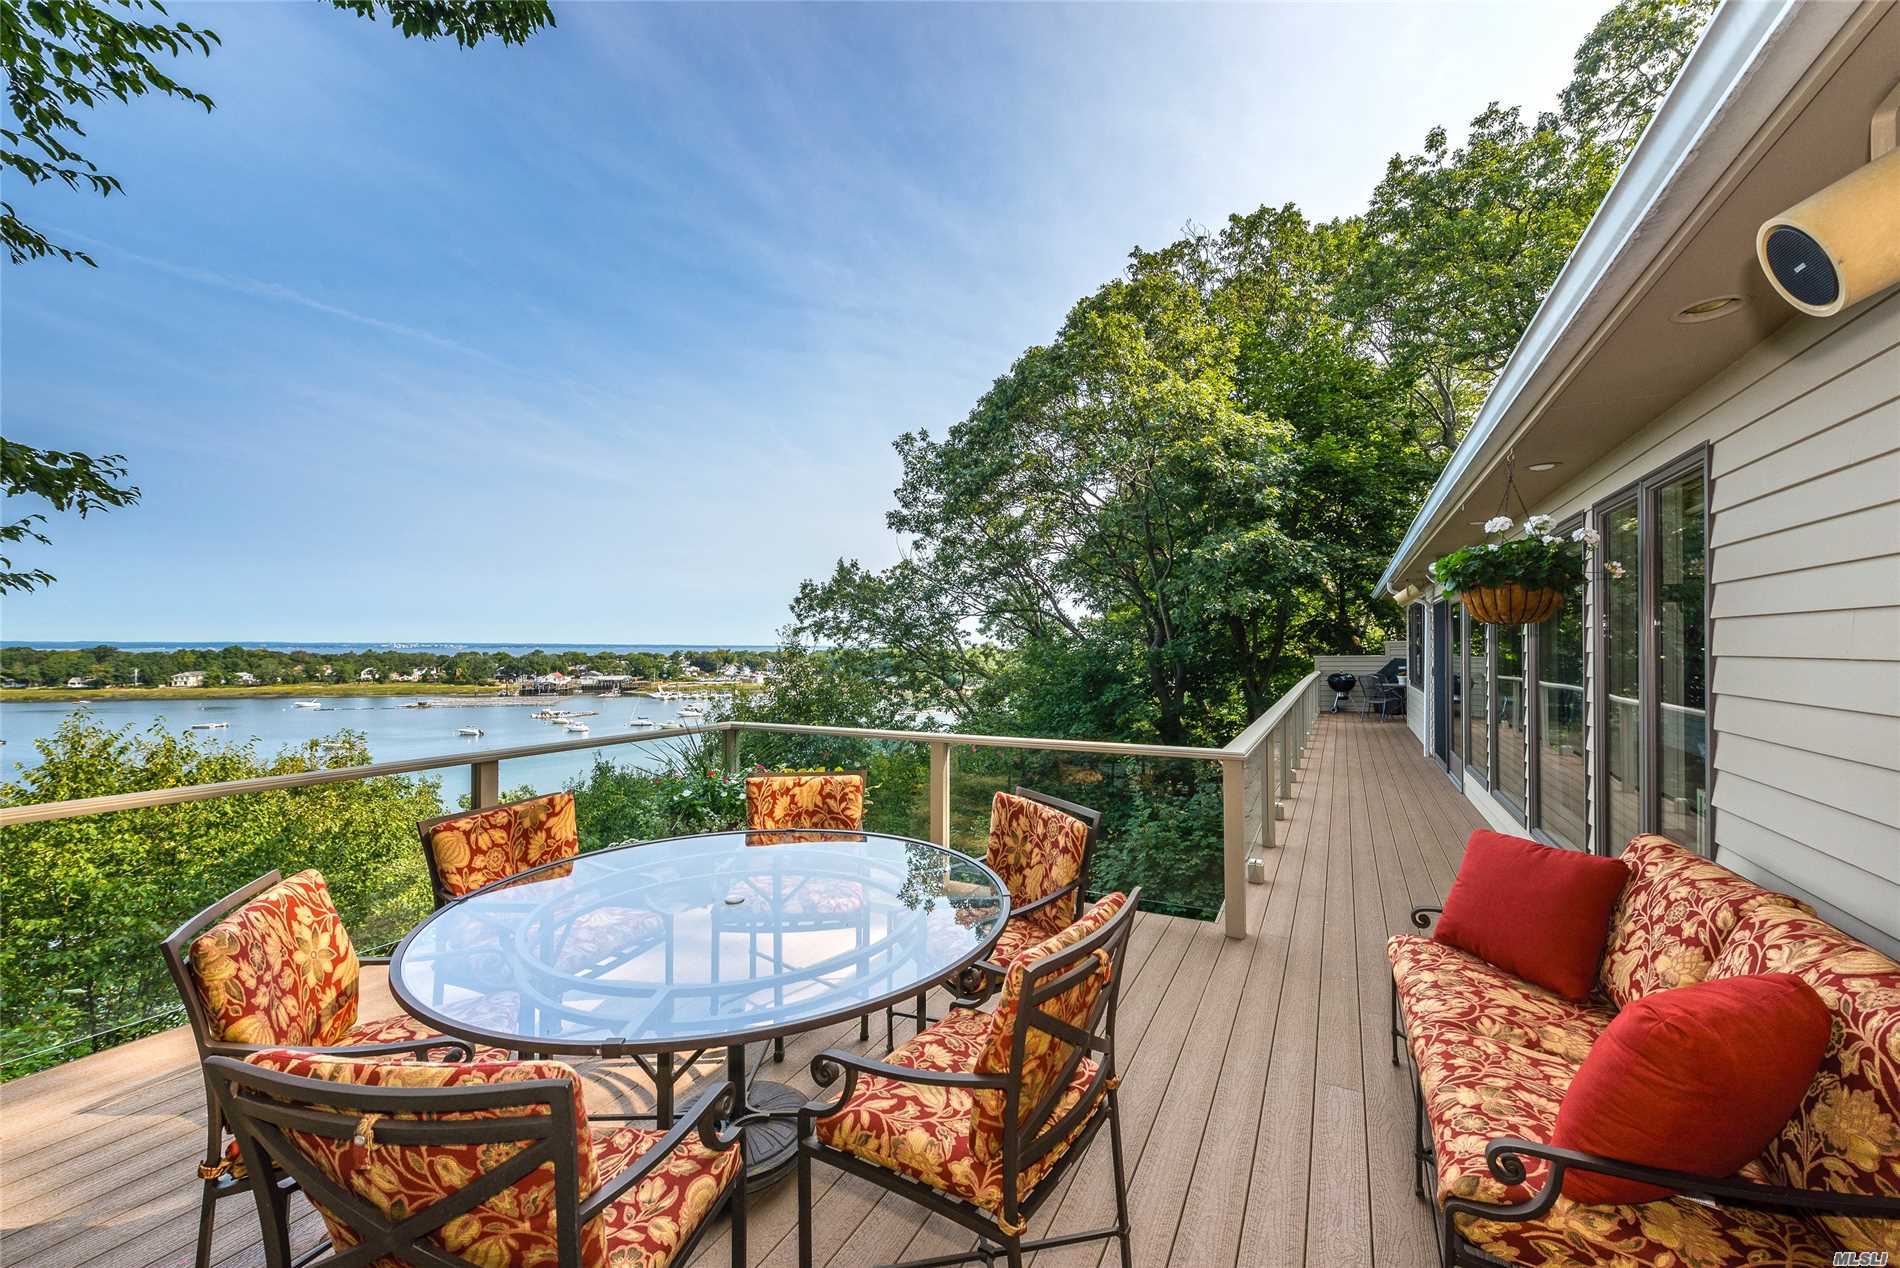 Enjoy Spectacular Water Views Of Mill Neck Creek, LI Sound And Connecticut Beyond In This 4-Bedroom, 2.5-Bath Hillside Retreat. This Meticulously Maintained Home Is Located In Mill Neck Estates, A Private Community Offering Private Beach Access & Mooring Rights. Perfect As A Summer Getaway, Weekender Or Year-Round Residence.